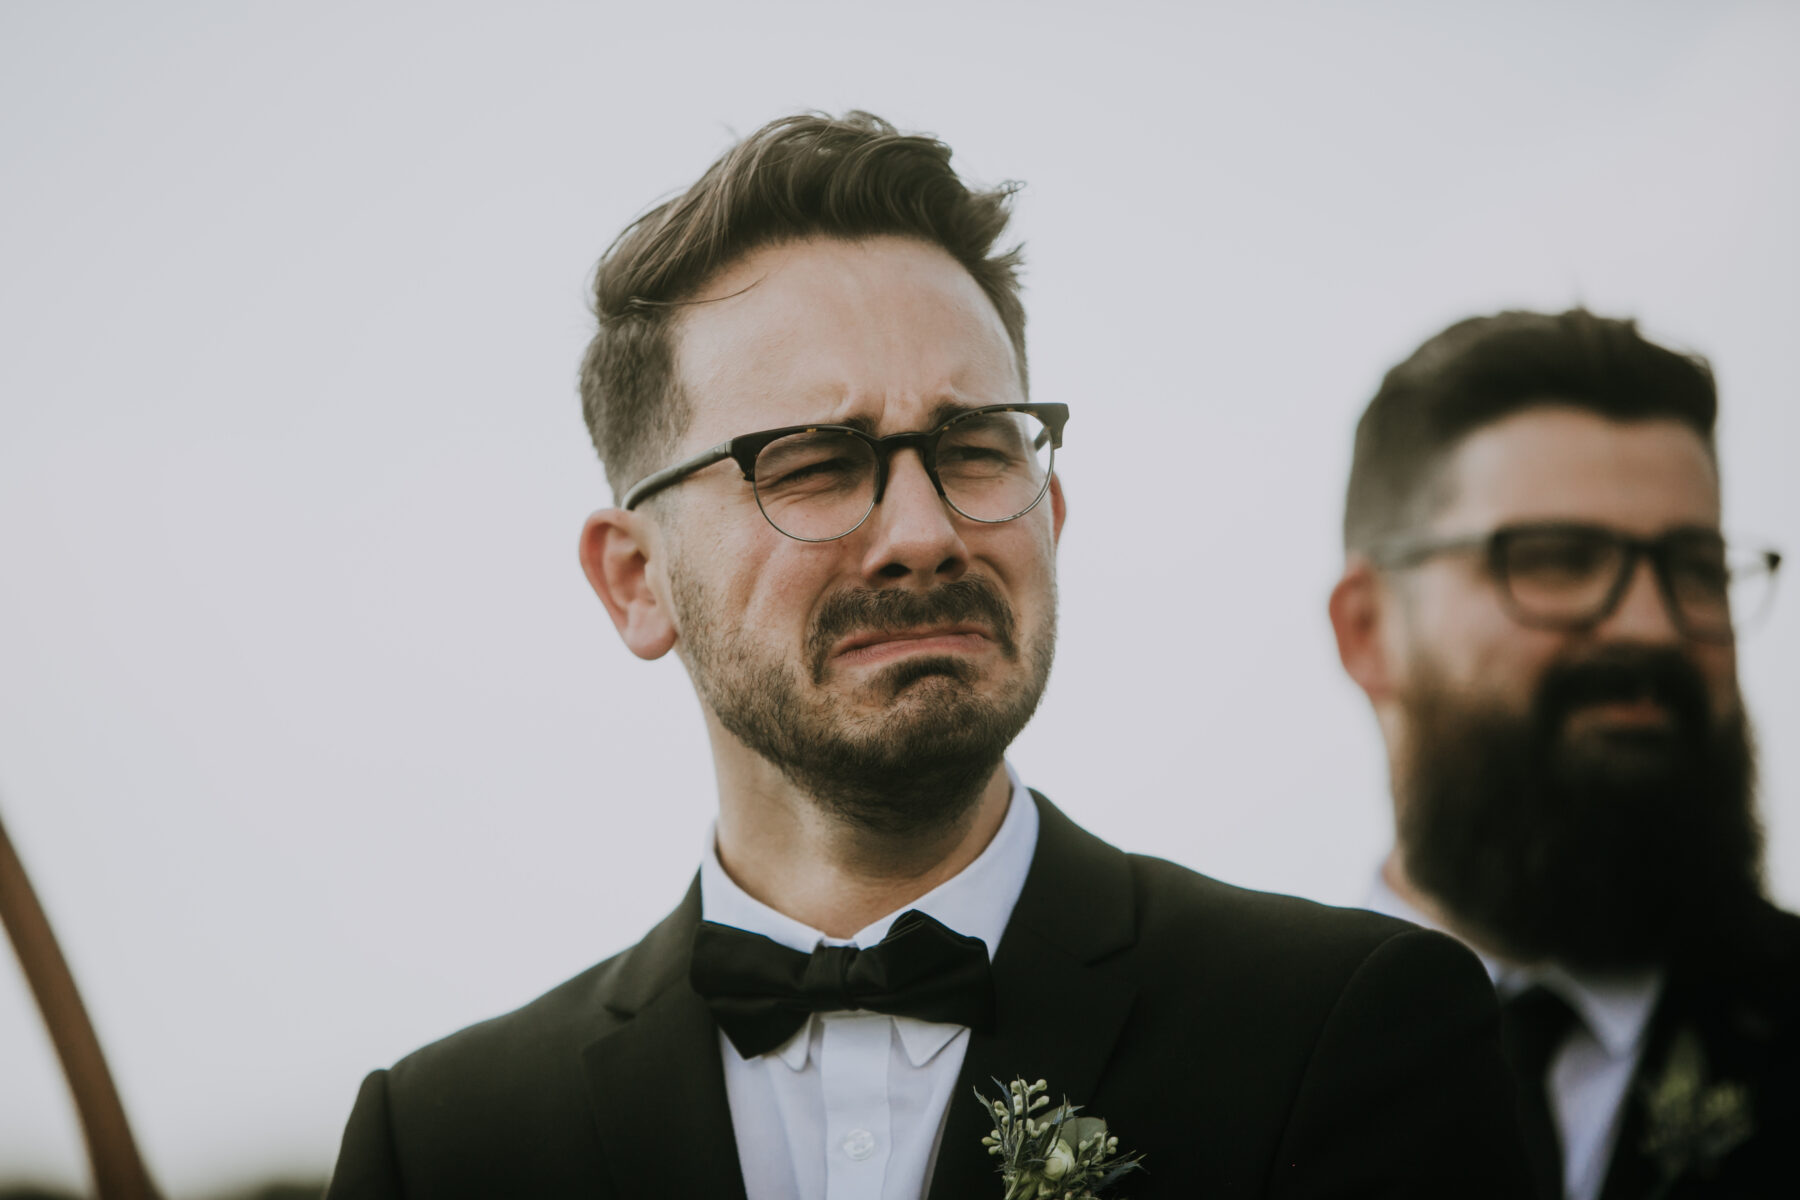 Grooms reaction to bride walking down the aisle: Nashville Wedding with Beautiful Views by Teale Photography featured on Nashville Bride Guide